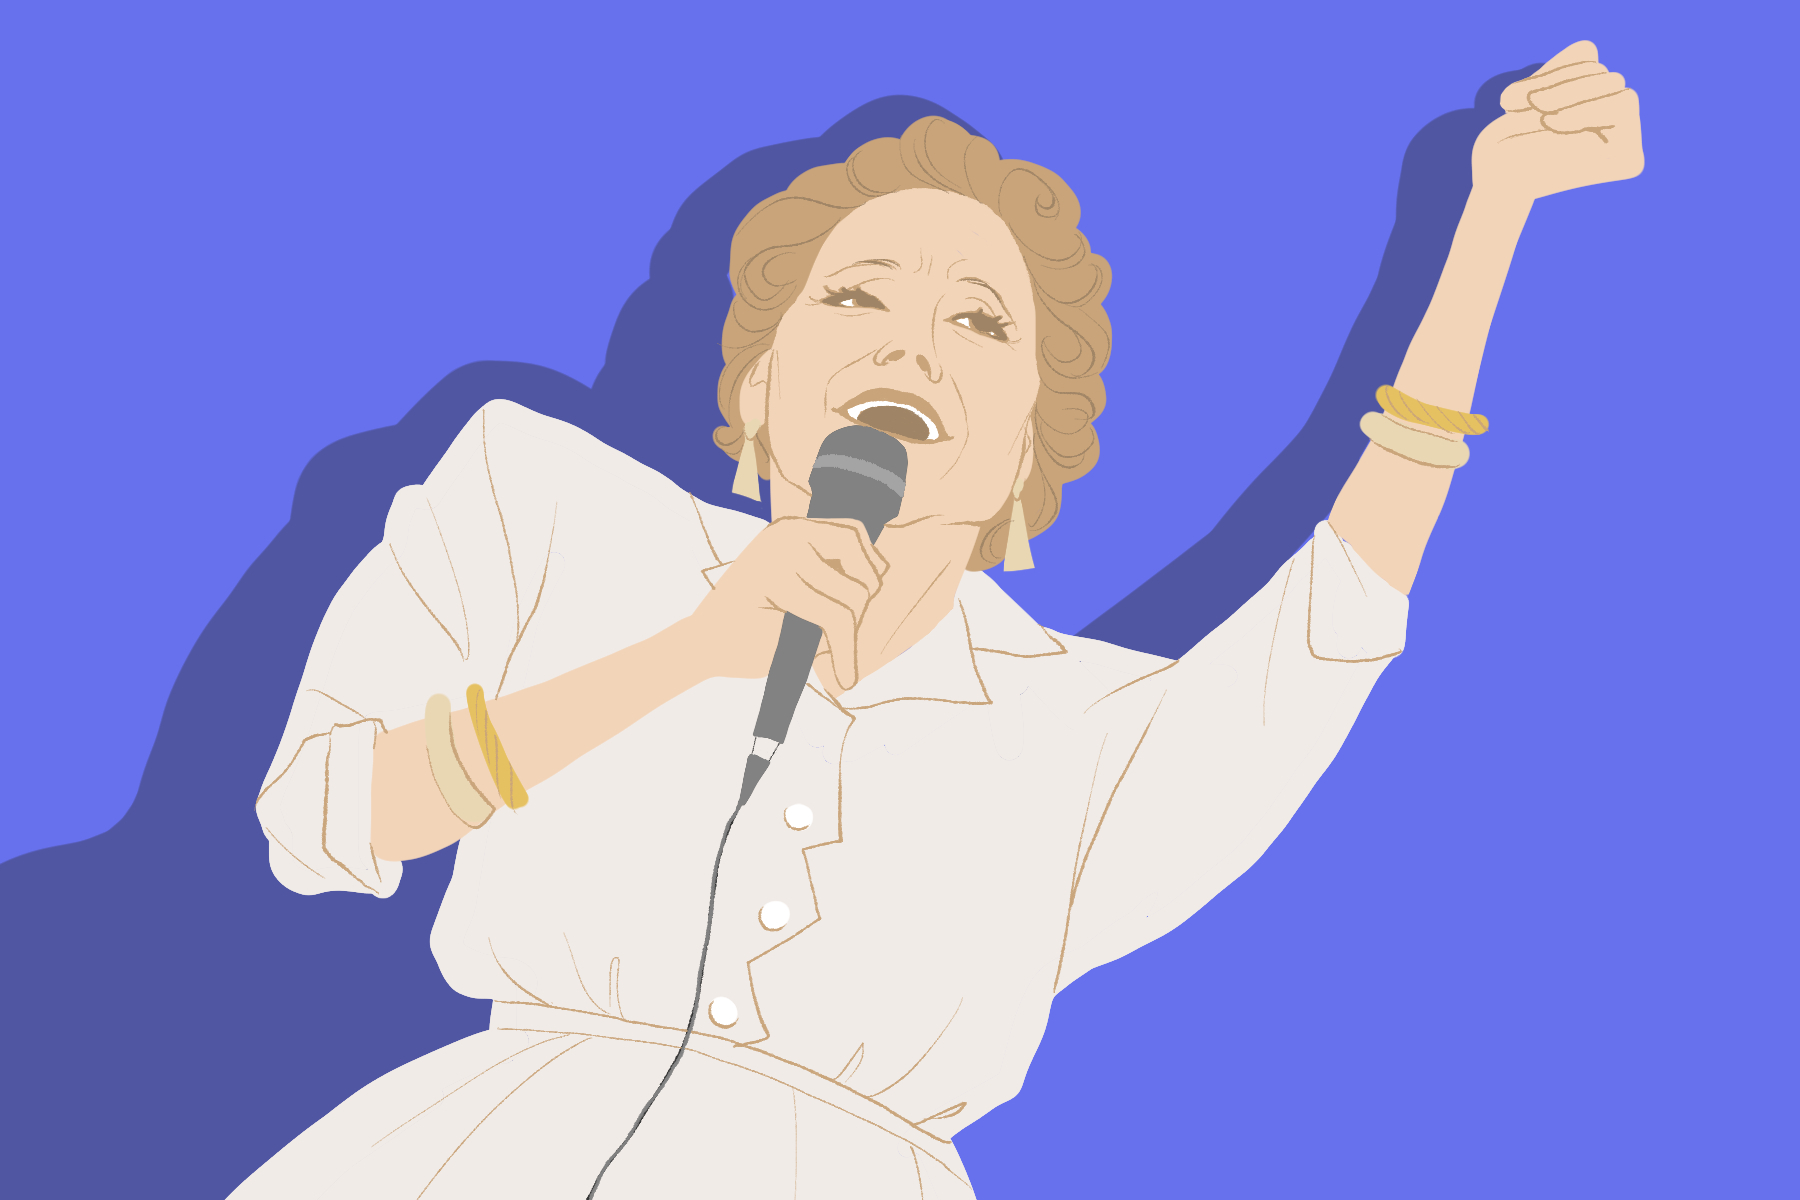 A drawing of "The Eyes of Tammy Faye" shows the title character singing with her fist raised.